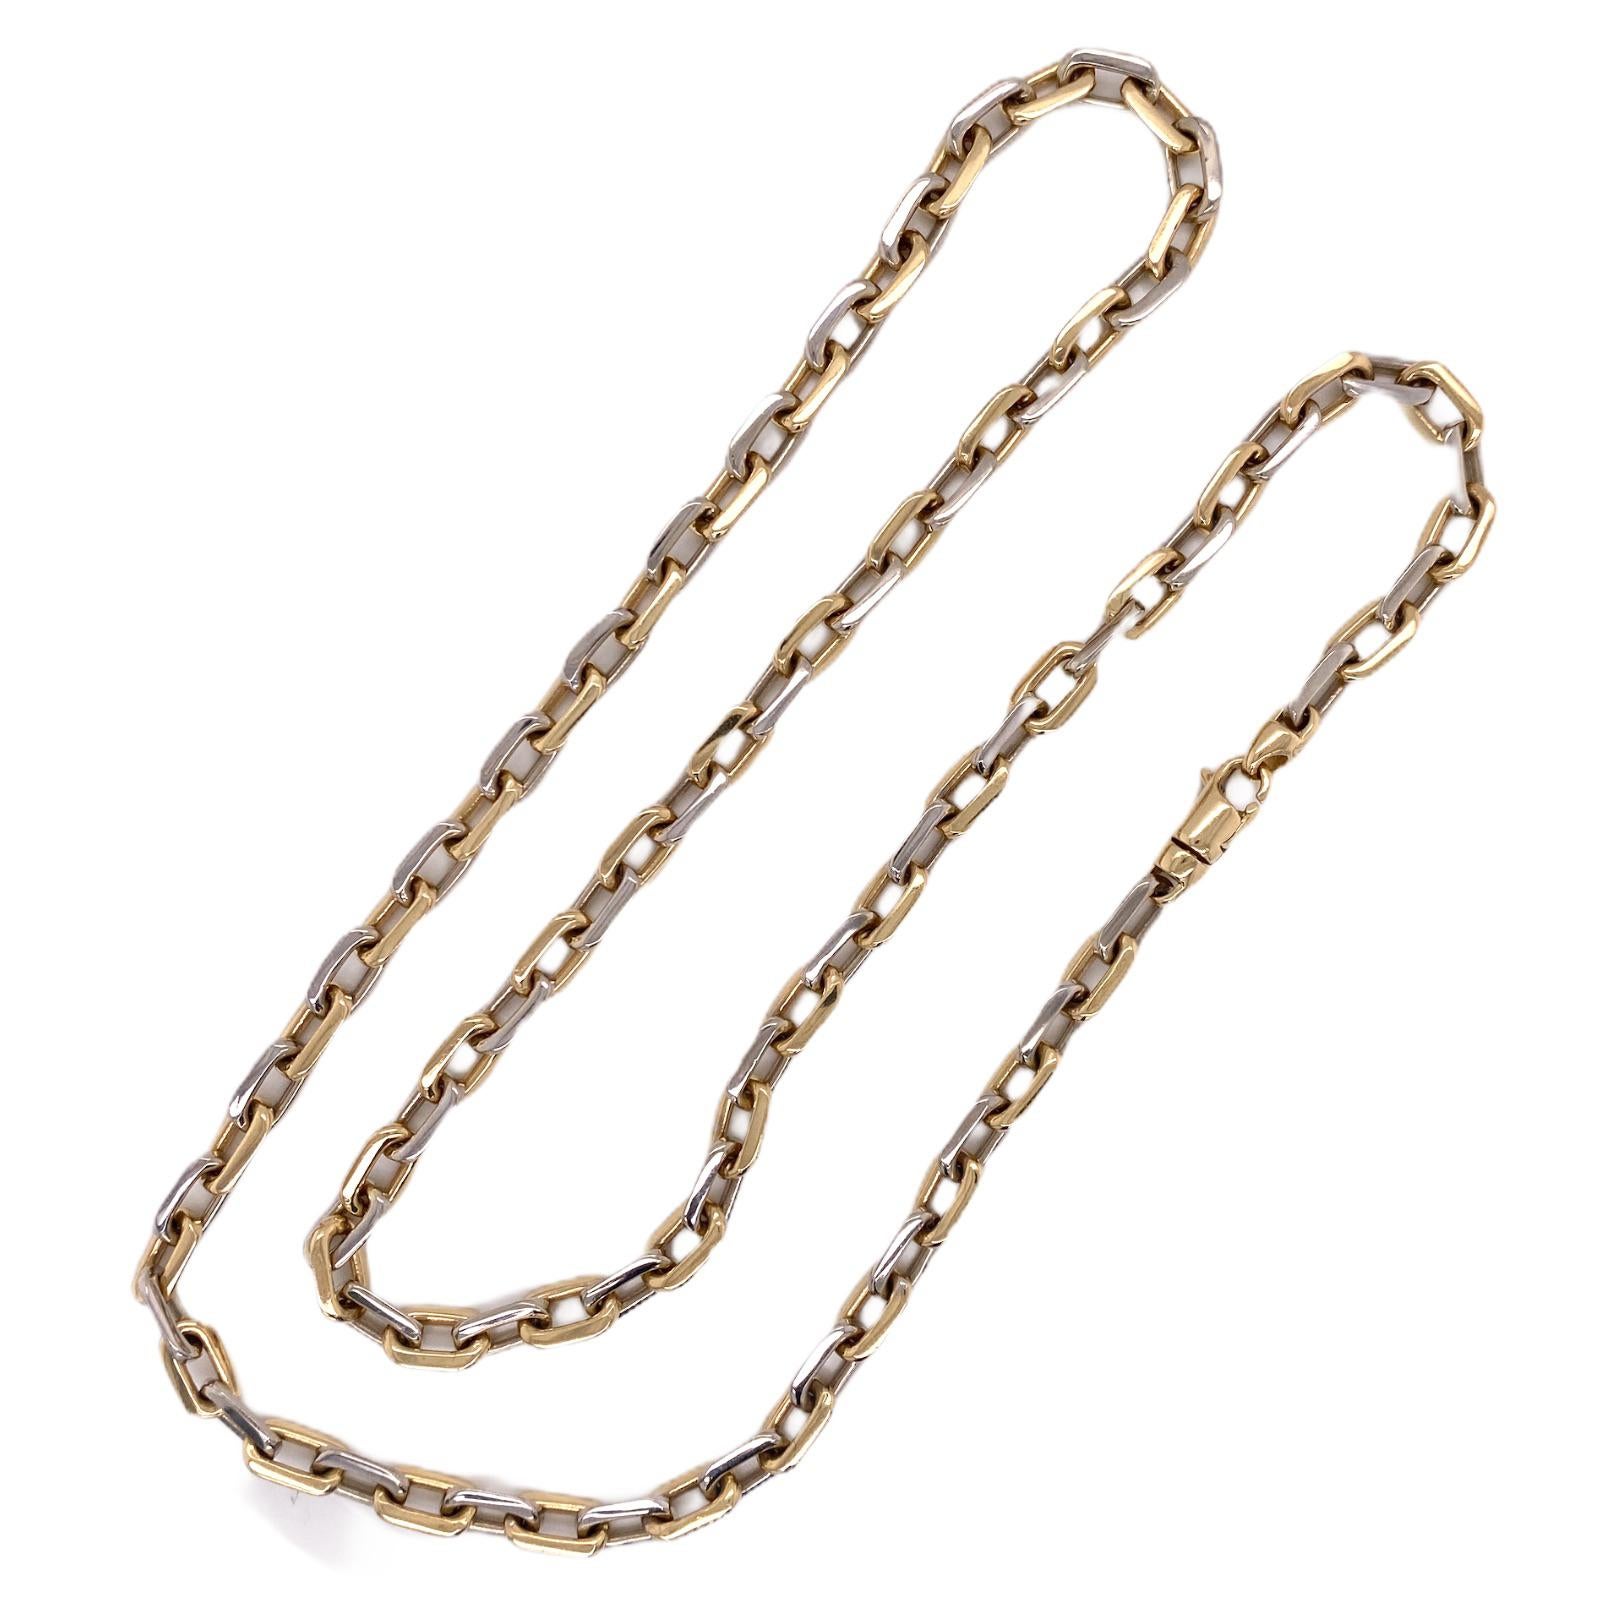 Men's rectangular solid link chain fashioned in 14 karat white and yellow gold. The necklace measures 24 inches in length and 5 mm in width. 